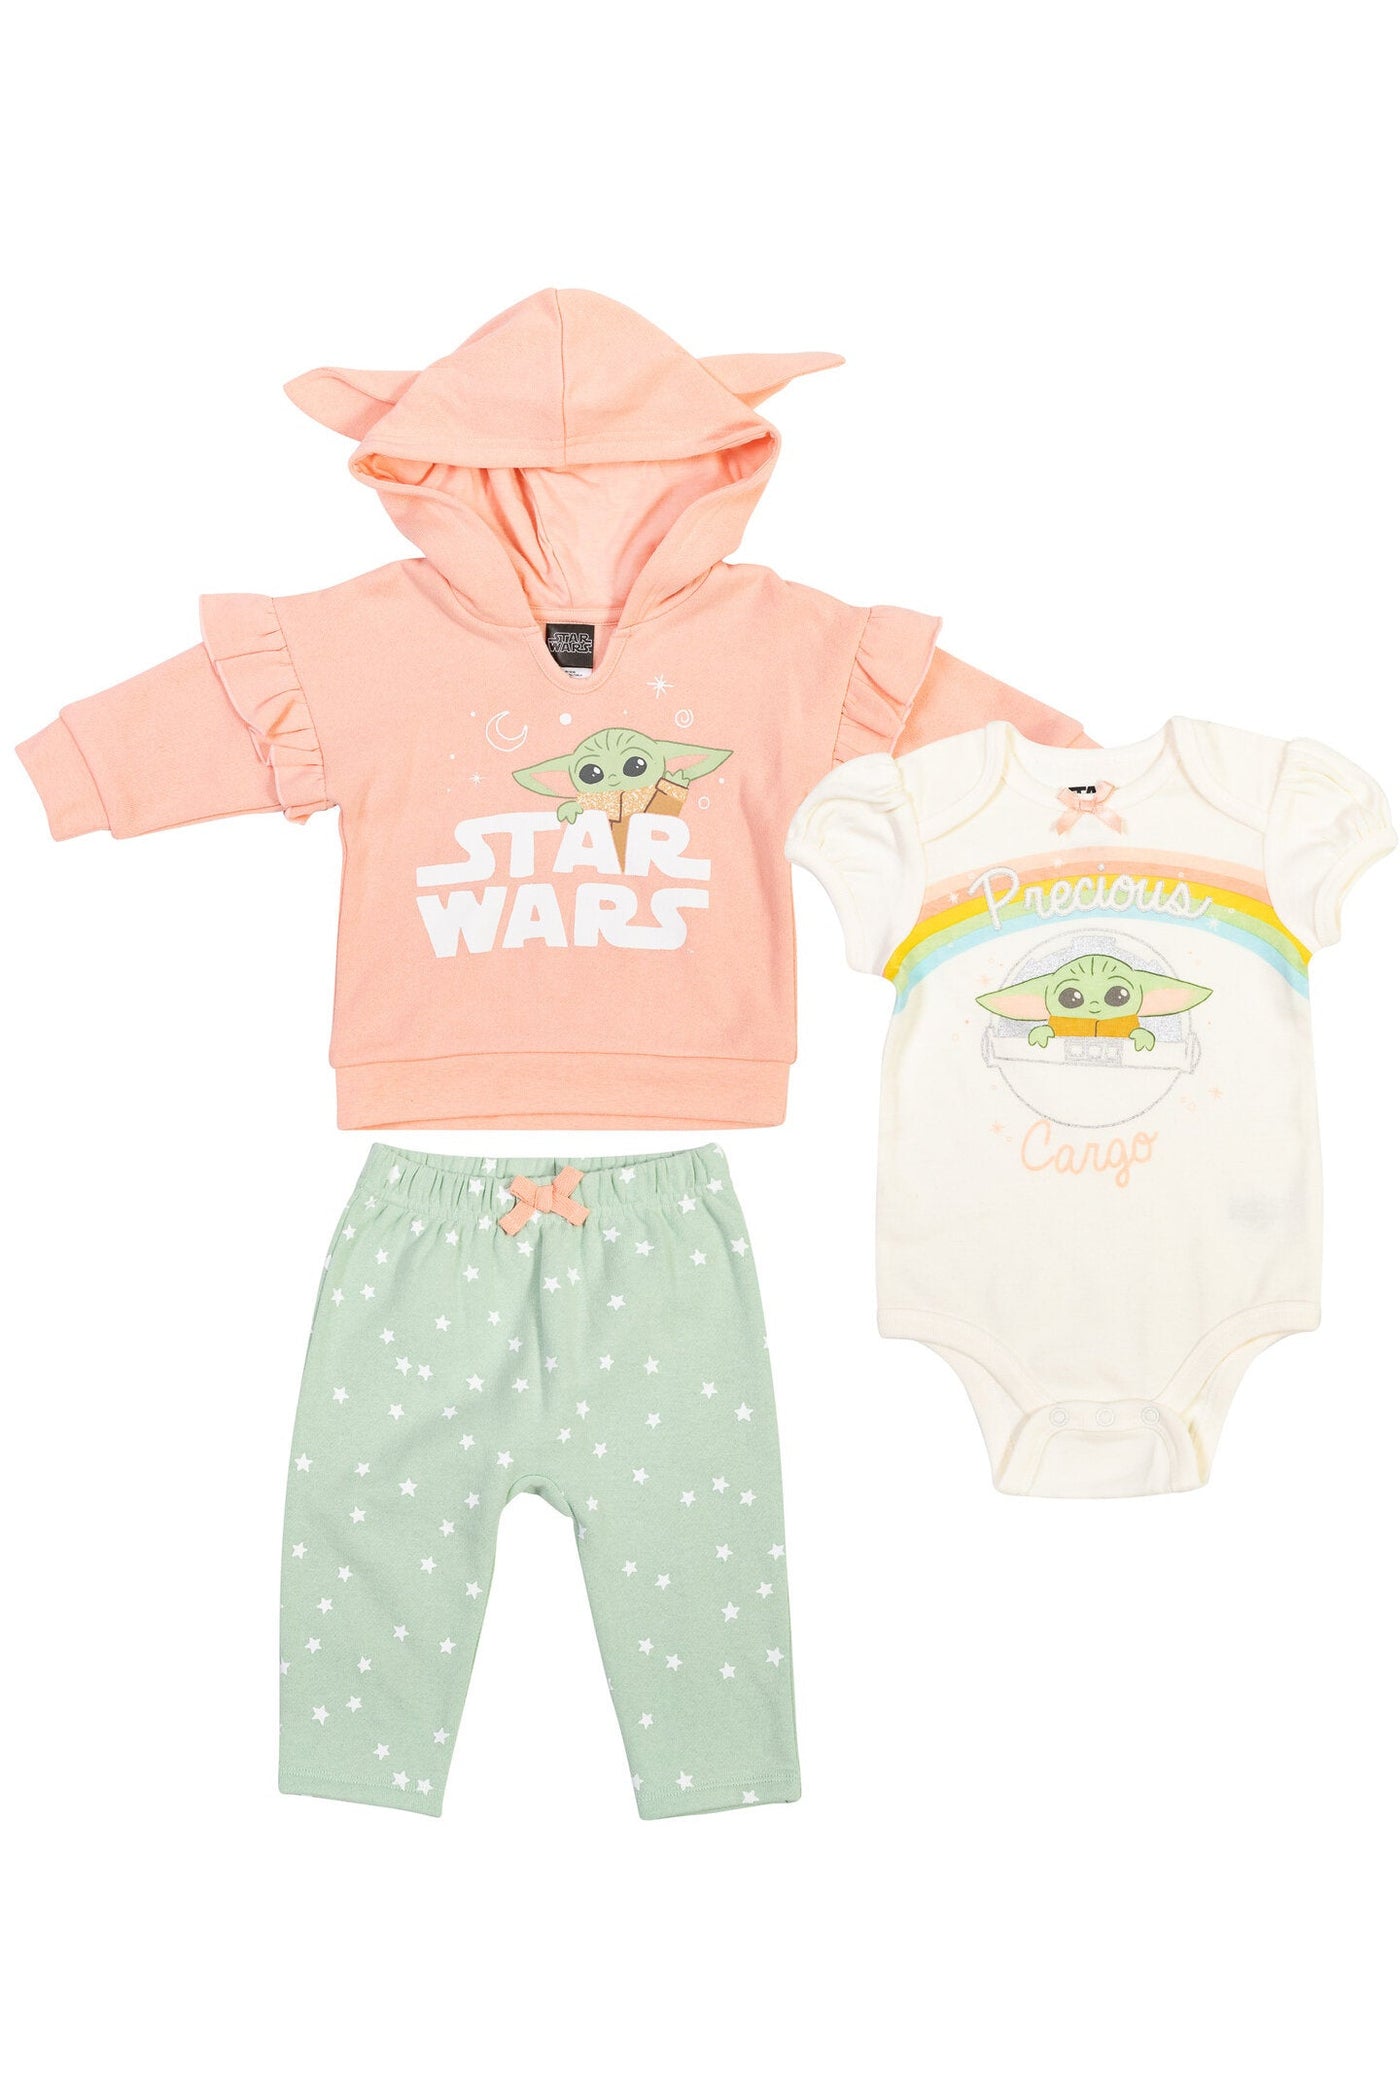 Star Wars Baby Yoda 3 Piece Outfit Set: Pullover Fleece Hoodie Cuddly Bodysuit Pants